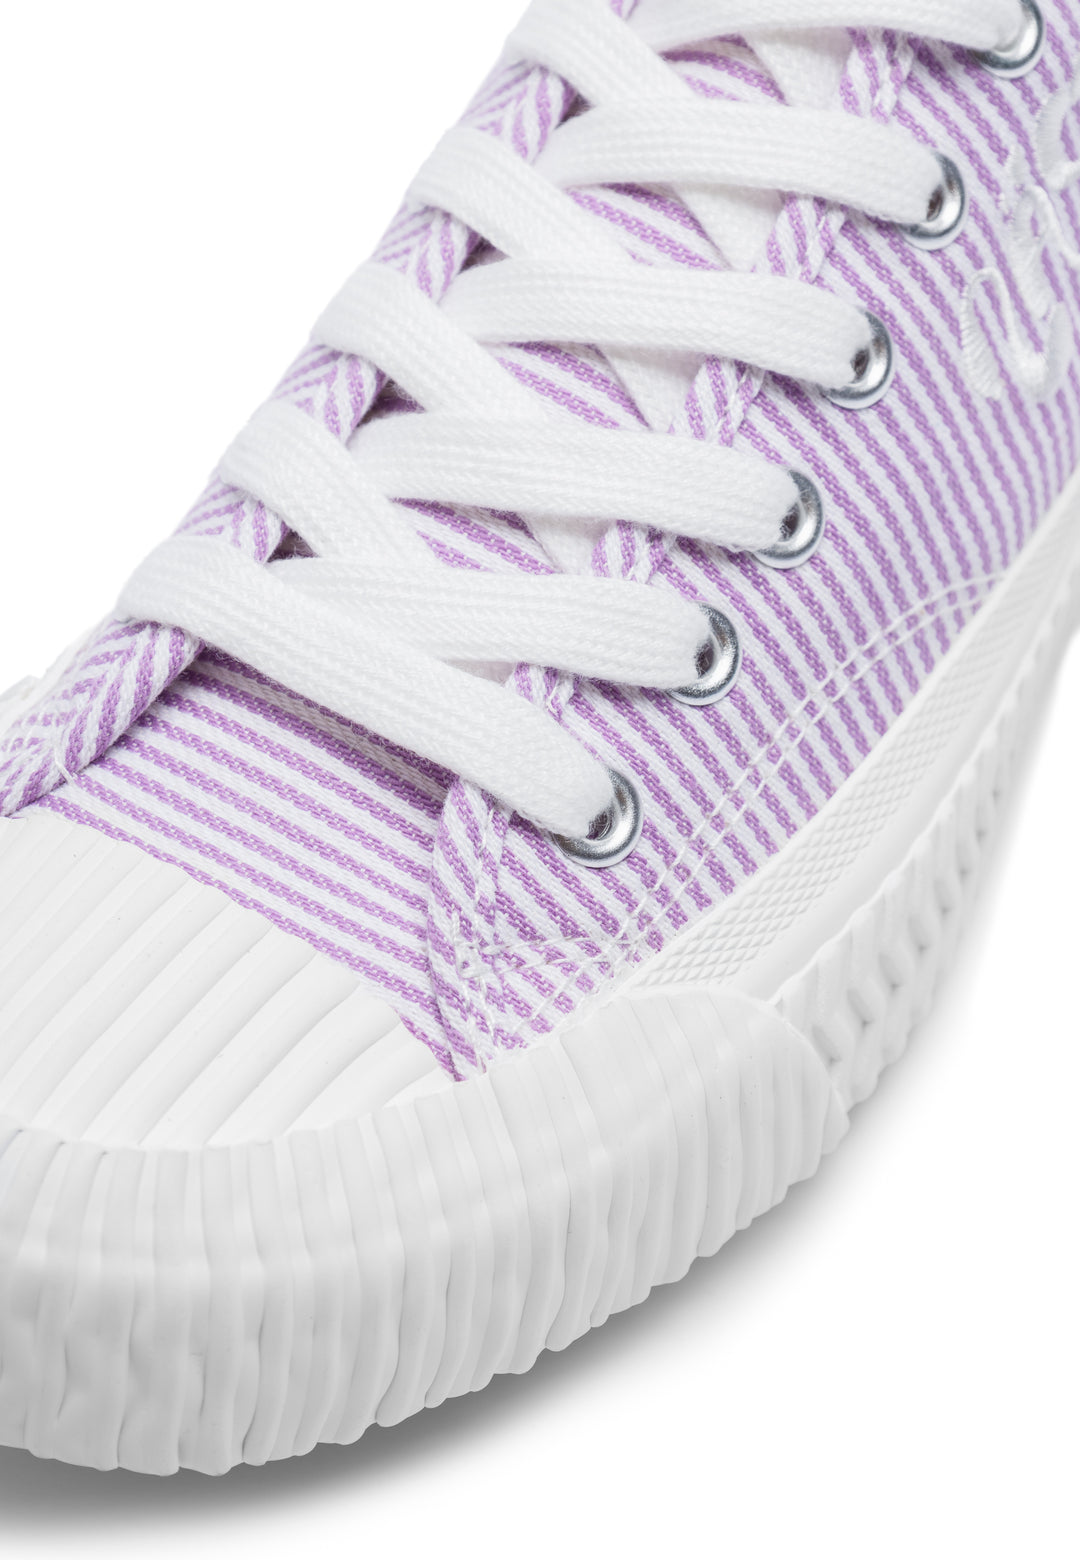 LÄST Fresh - Textile - Light Lilac/Off White Low Sneakers Light Lilac/Off White